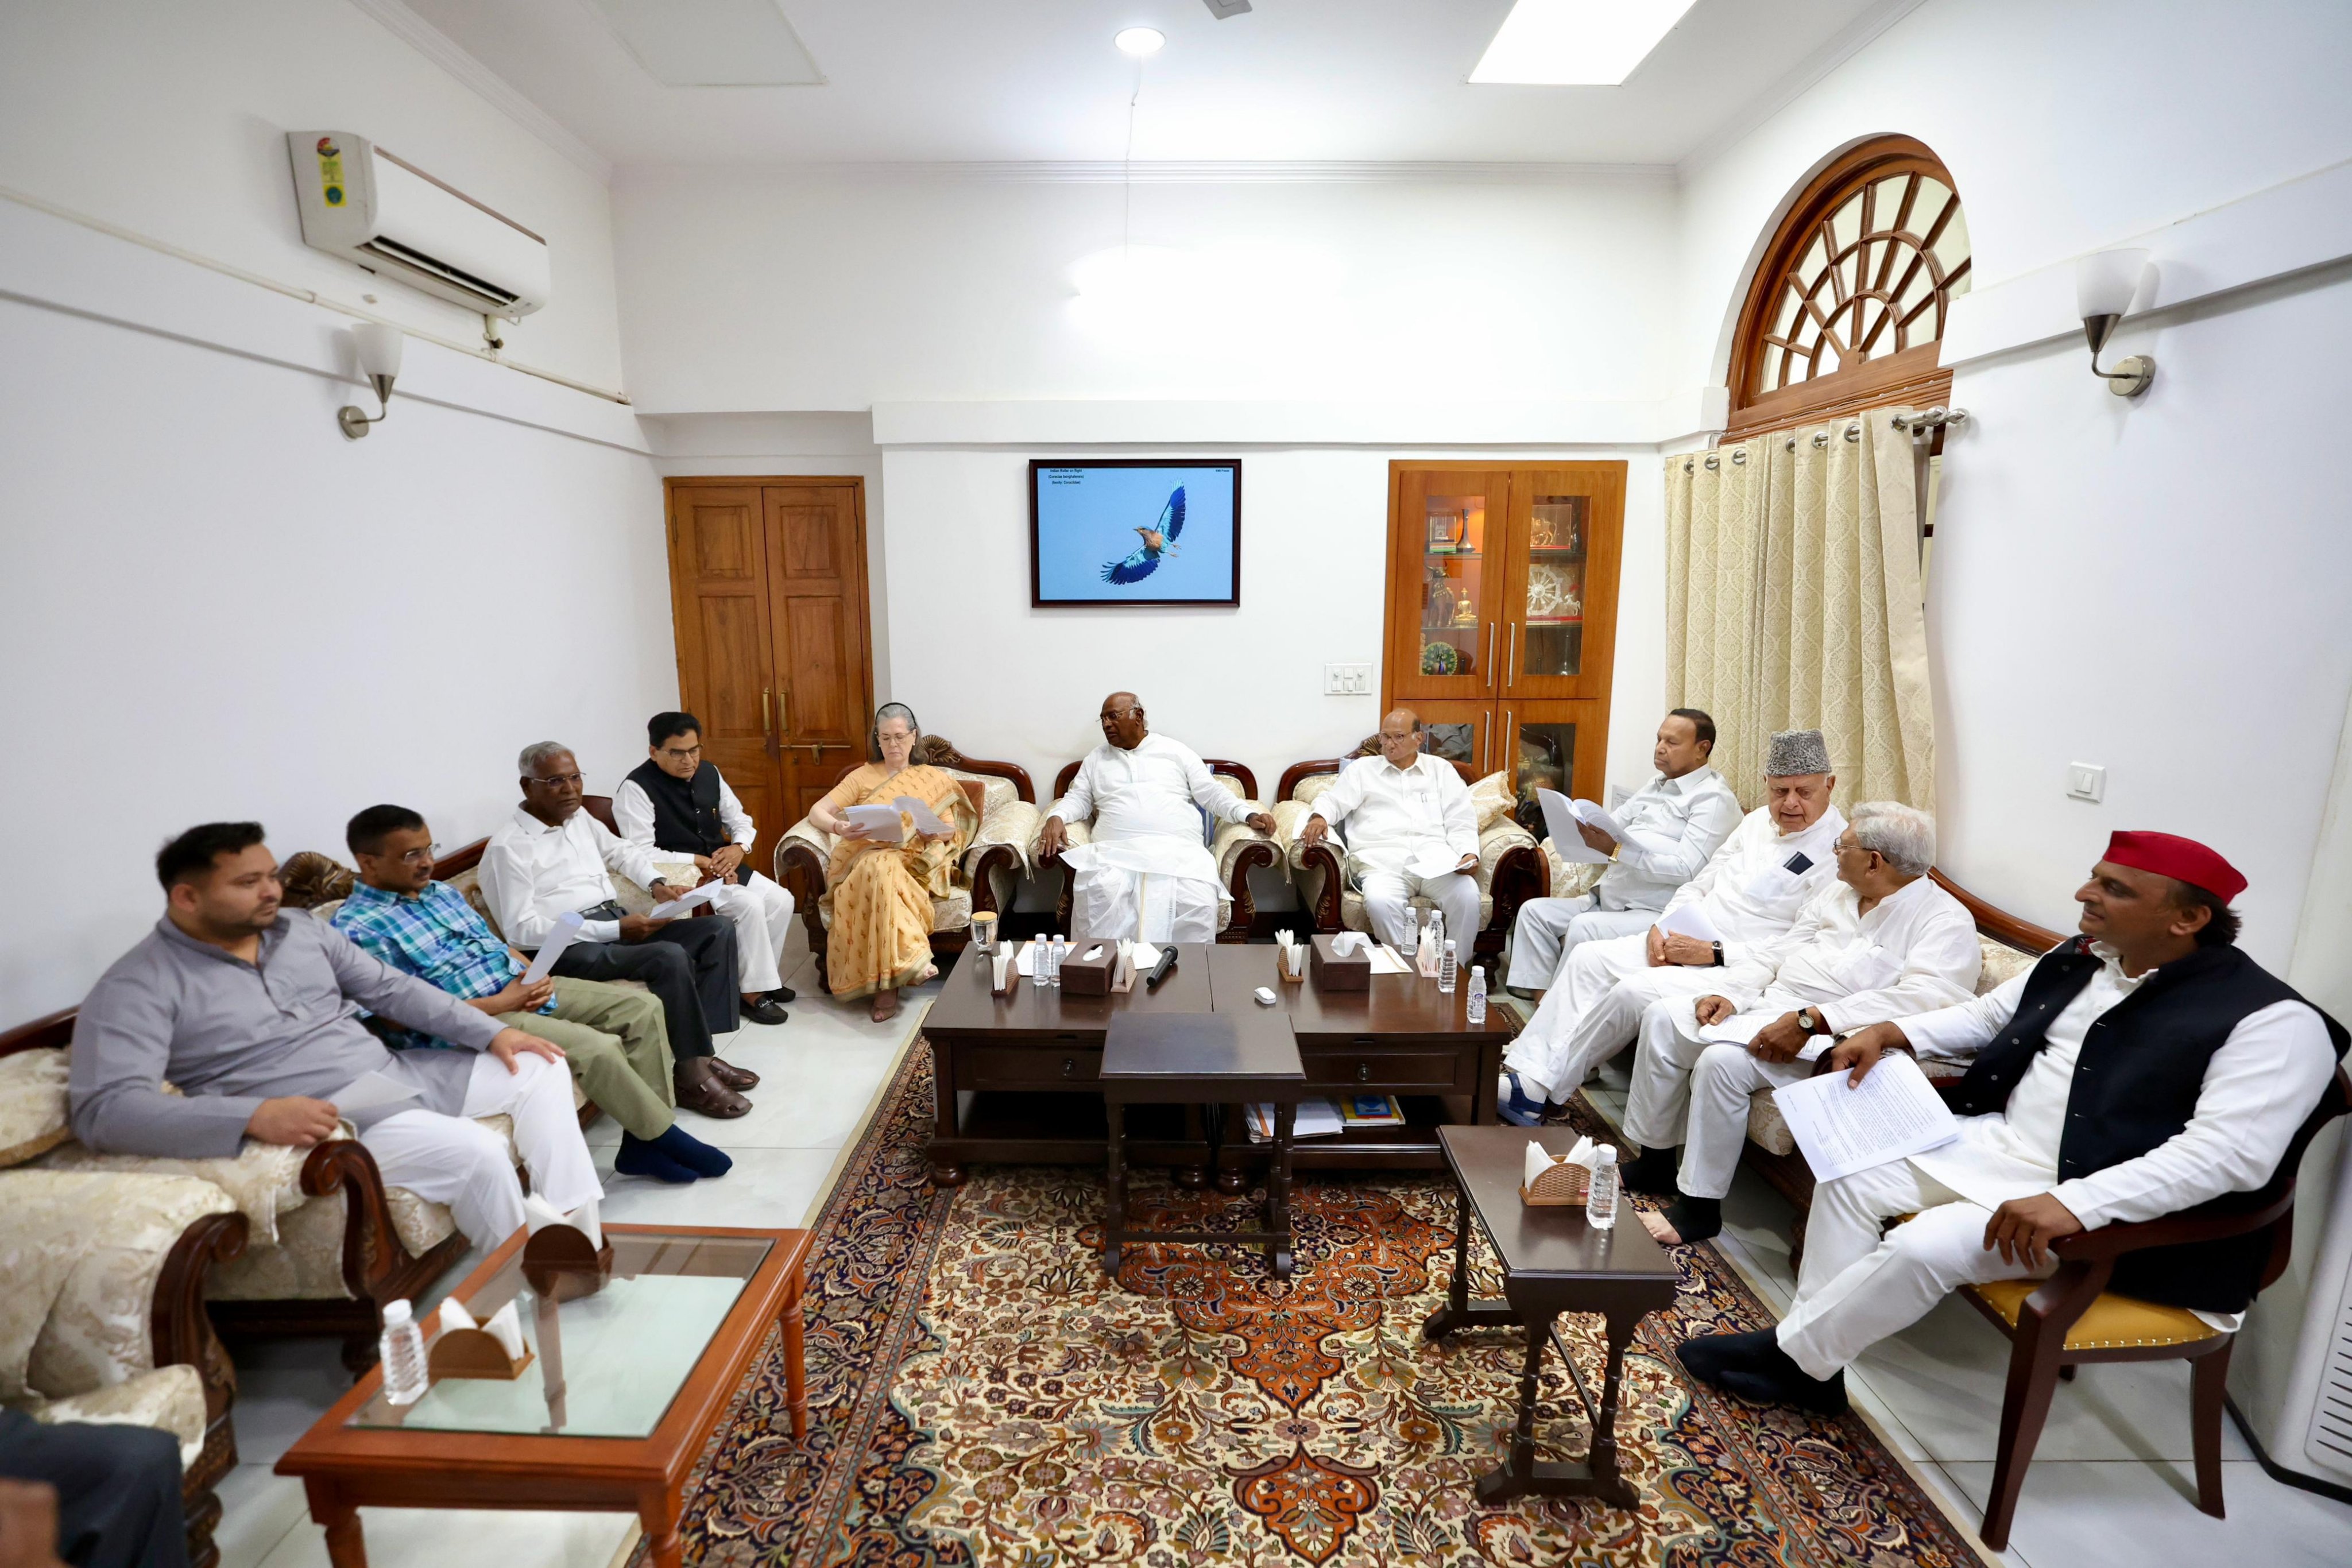 Congress Chief Mallikarjuna Kharge Saturday said the INDIA bloc leaders are confident of a positive outcome in the Lok Sabha elections, however, 